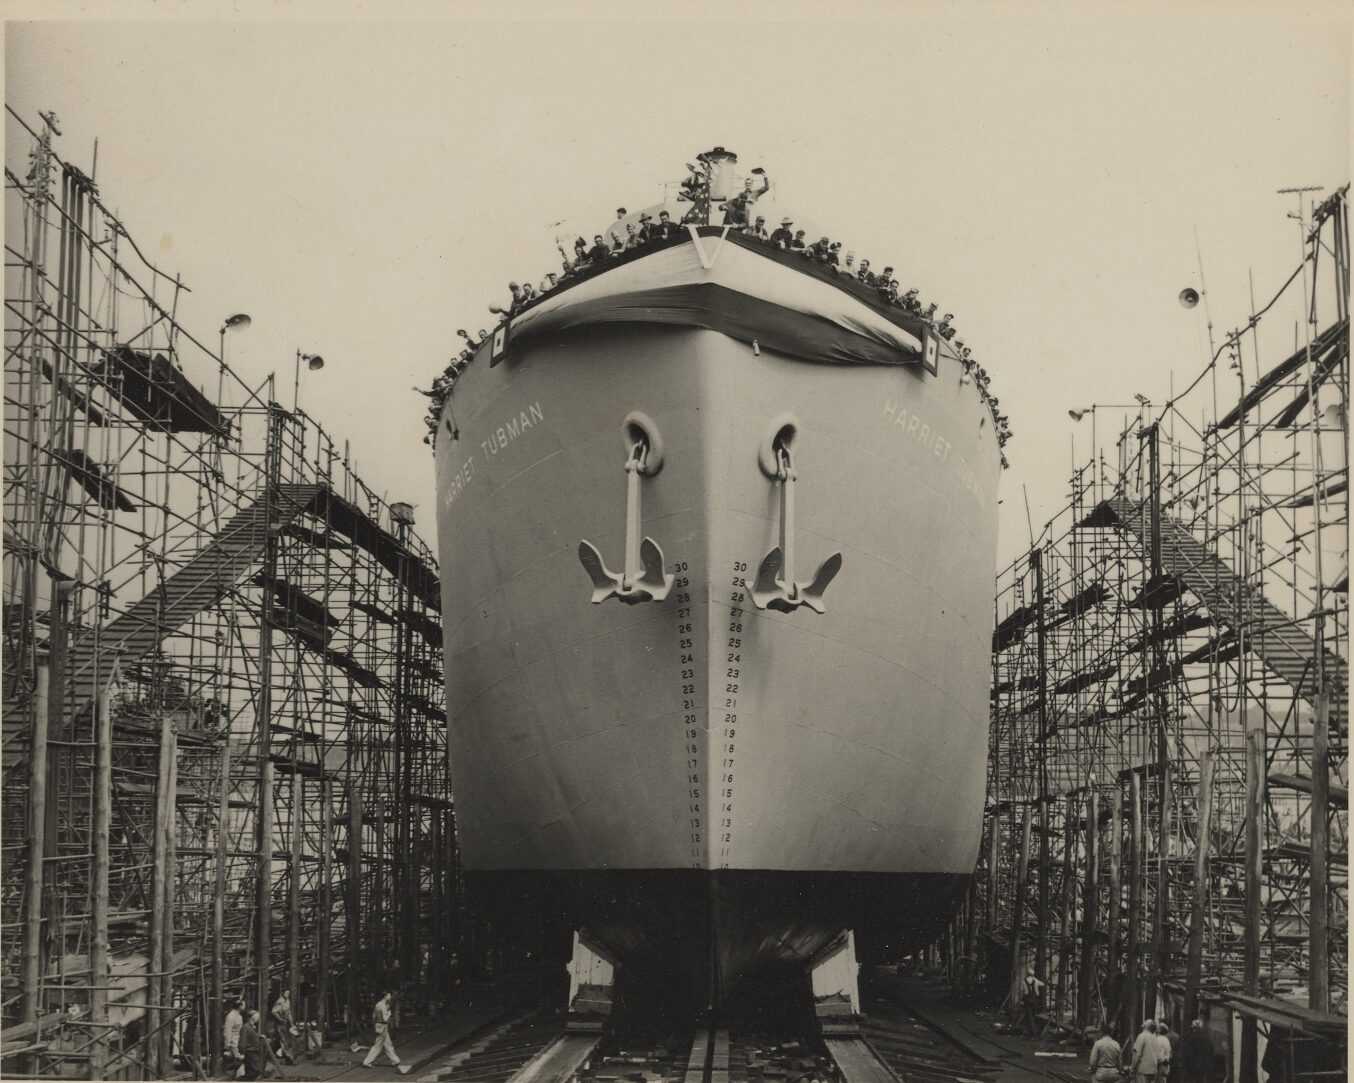 A black-and-white photograph of the liberty ship S.S. Harriet Tubman as it is launched down the slipway and into the Atlantic Ocean, mounted on a black paper page of a bound photograph album commemorating the event owned by Harriet Tubman's niece, Eva Stewart Northrup. The bow of the ship is depicted in the center of the image, surrounded by scaffolding. Two raised anchors feature prominently on either side of the ship and at the top is a striped banner with a large "V" victory symbol at the center. On each side of the ship are large letters reading [HARRIET TUBMAN]. The deck of the ship is loaded with sailors, shipwrights and others, many waving their hats in the air. There are also several men standing on either side of the shipway. There are no marks or inscriptions, front or back.